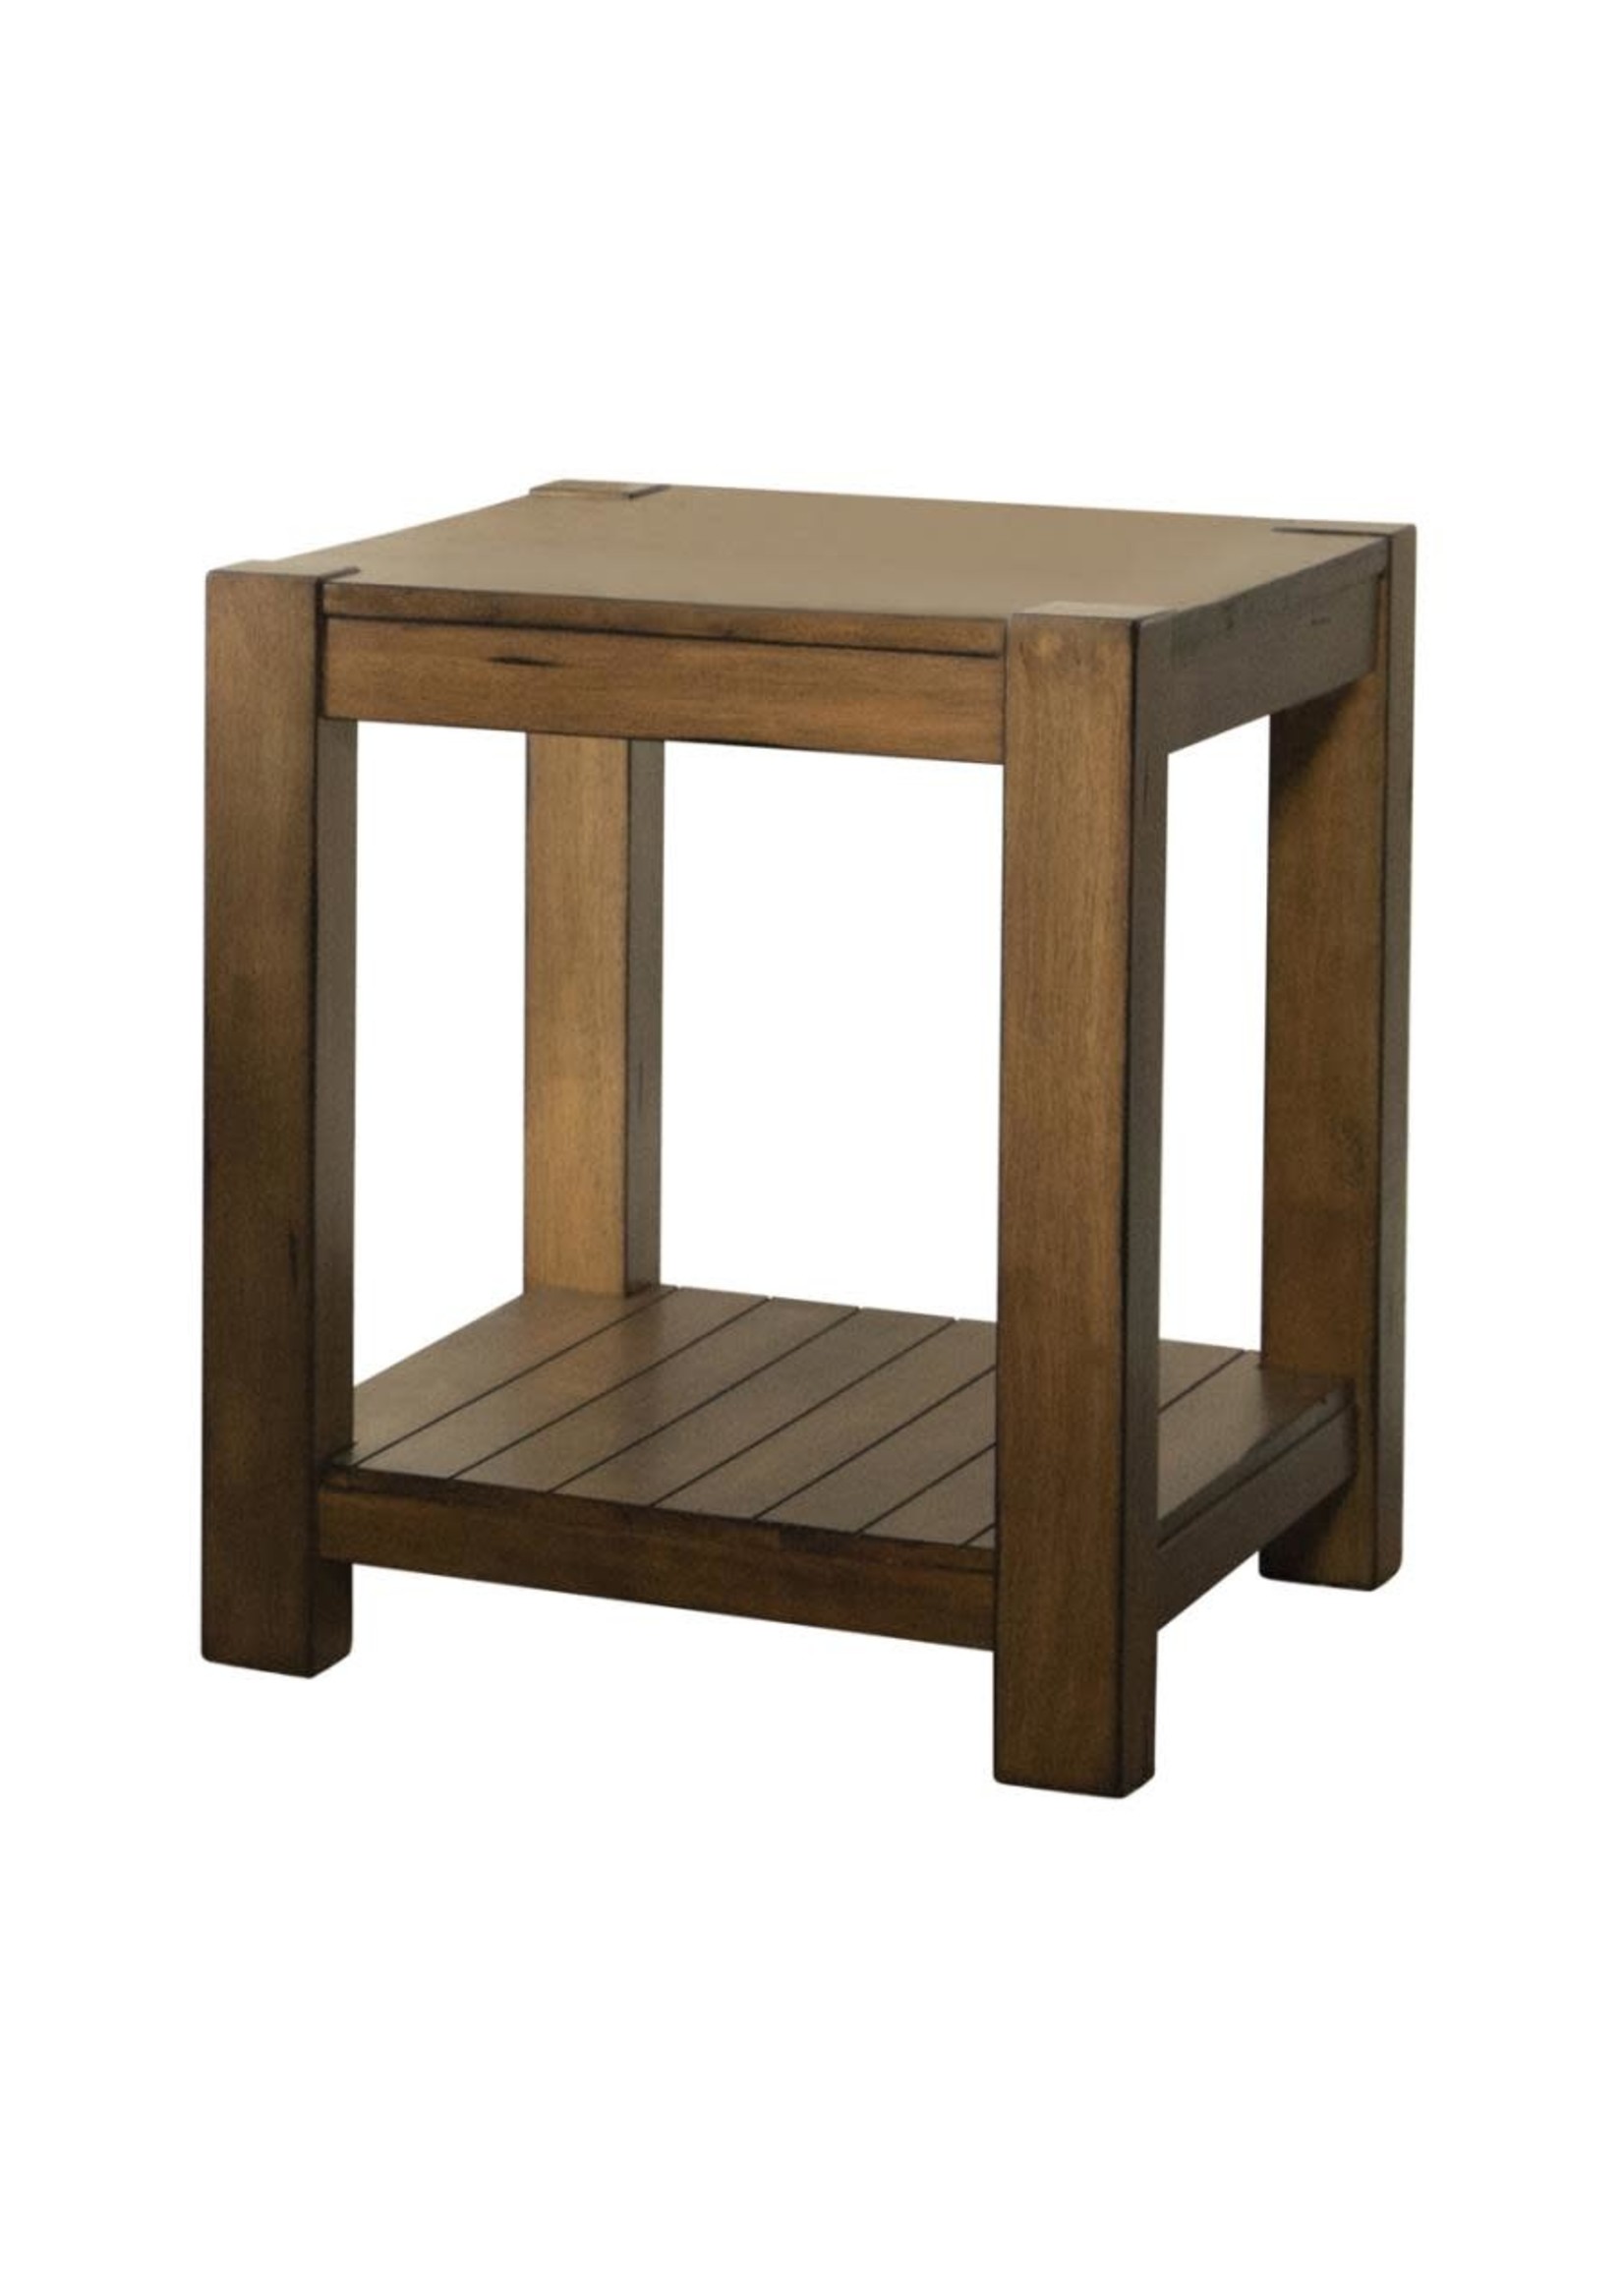 COASTER 724337 END TABLE RUSTIC BROWN